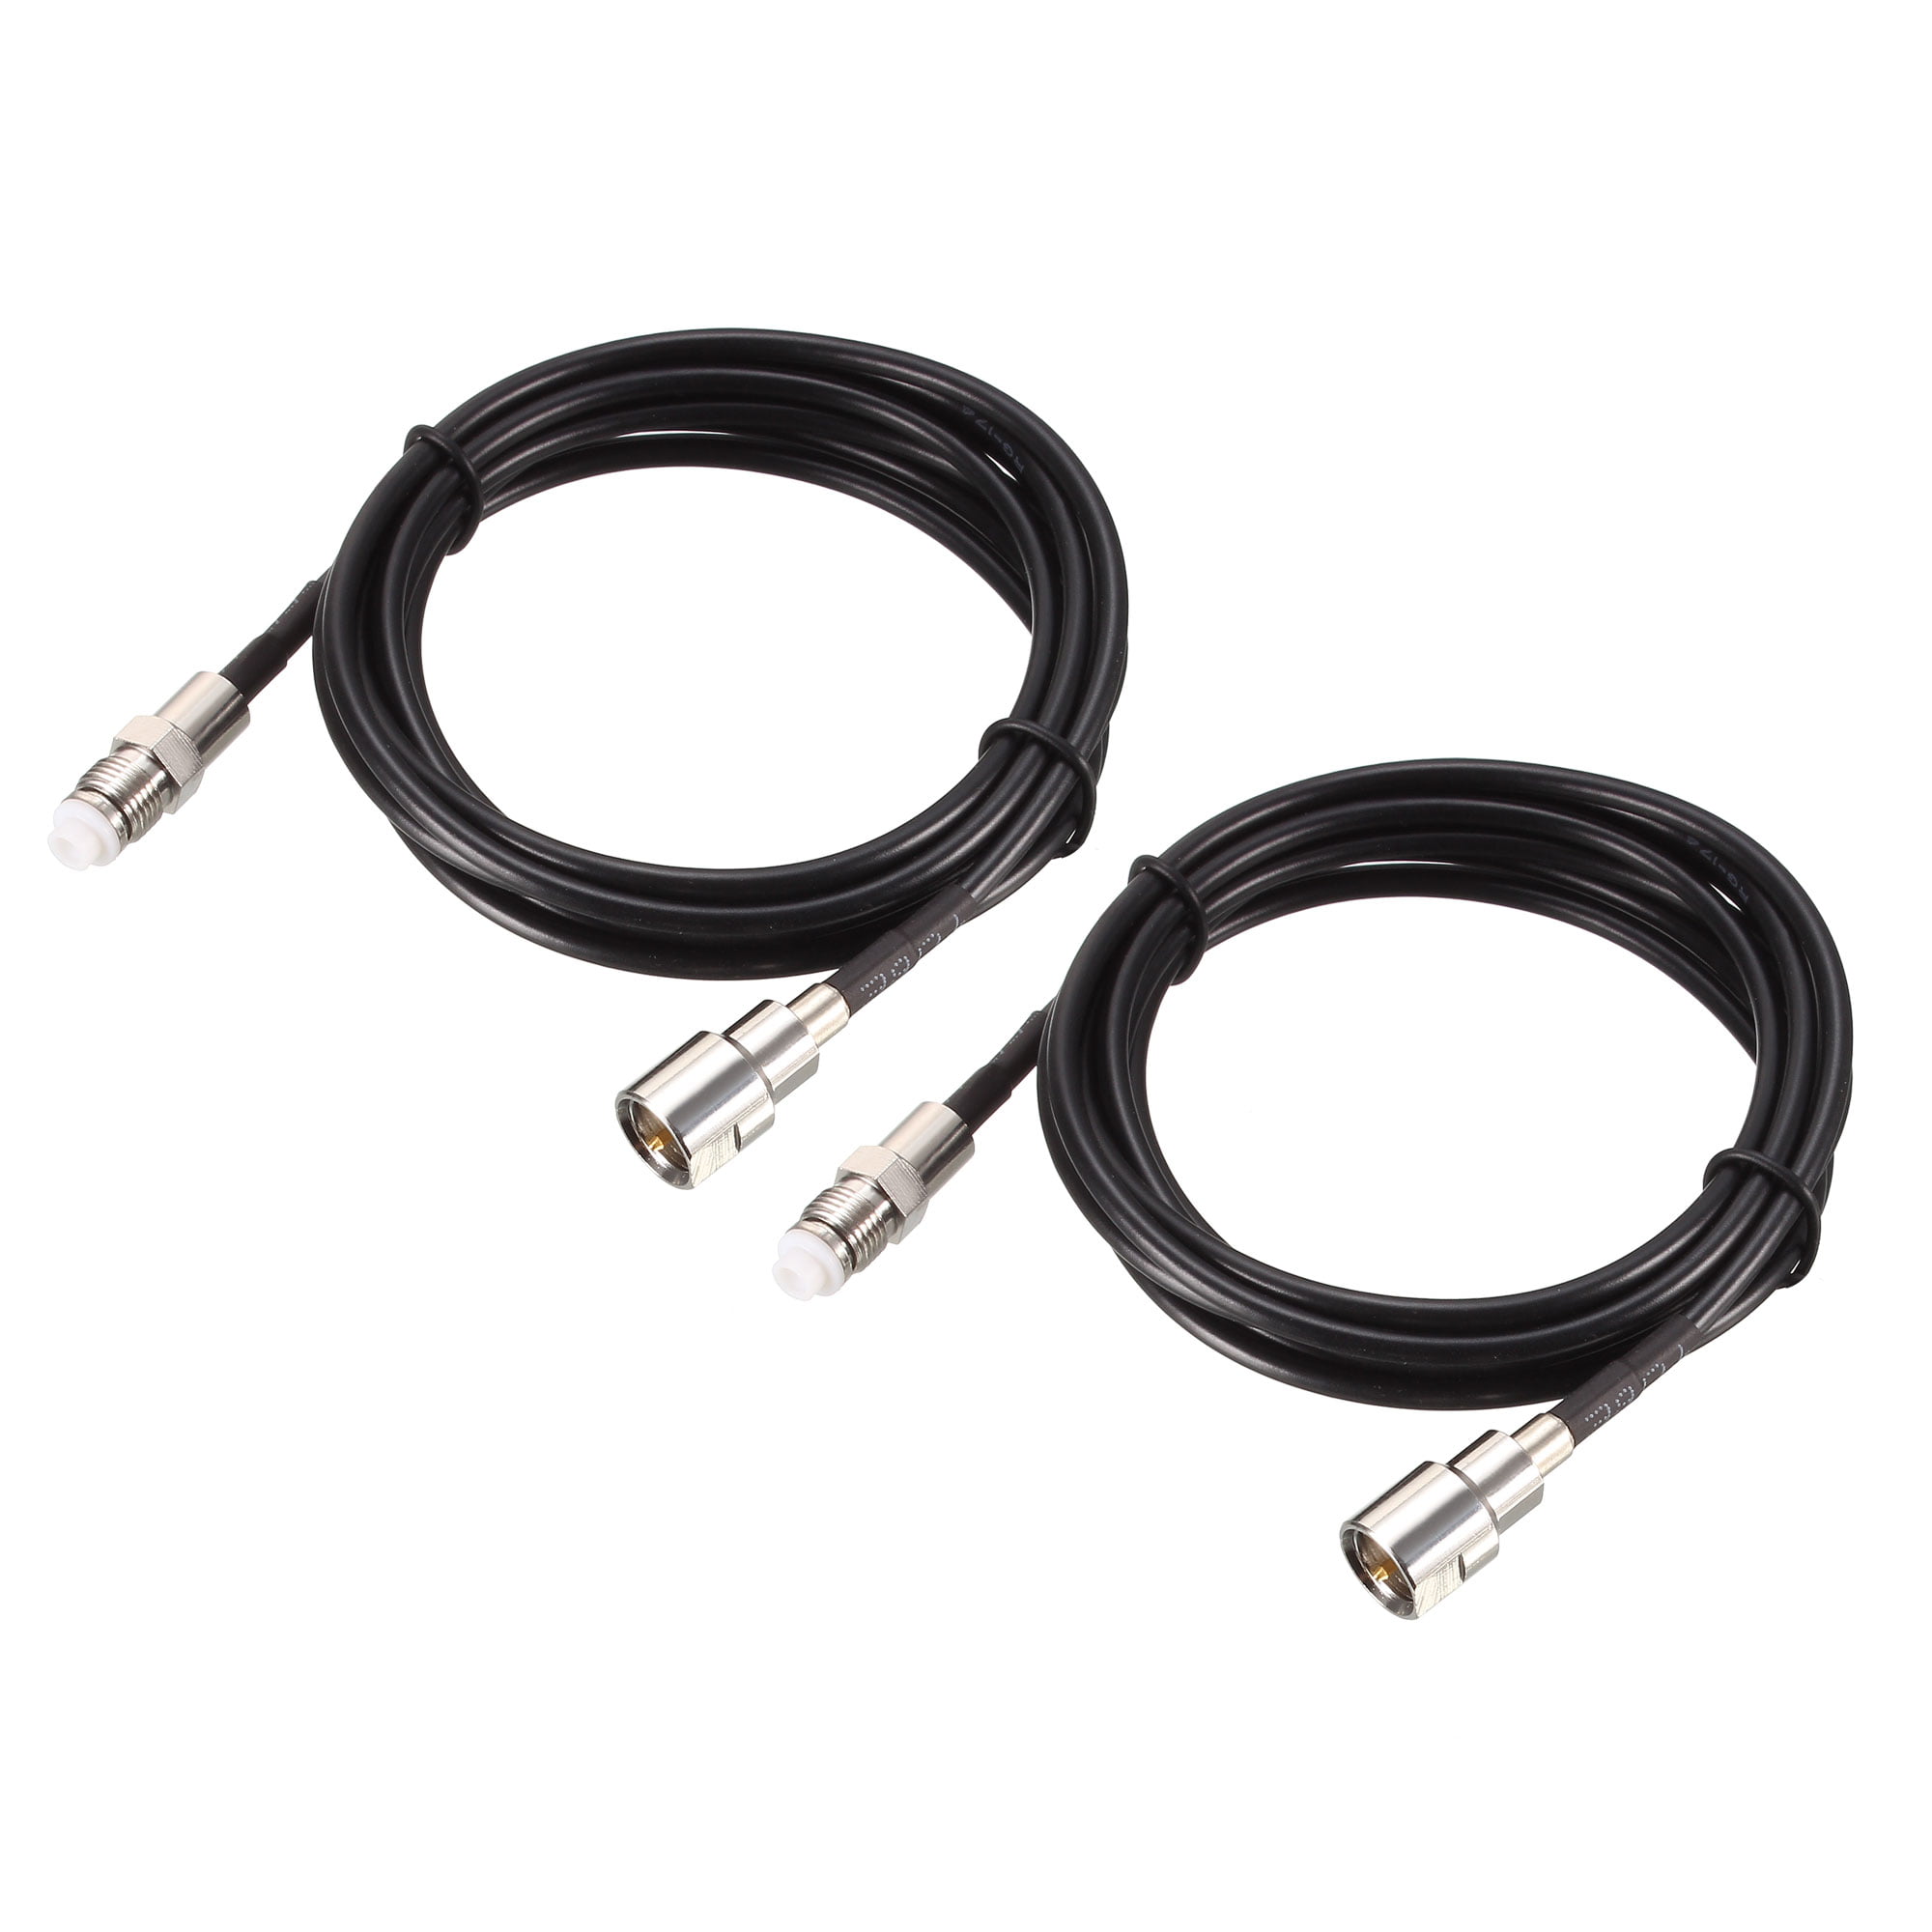 50pcs 3.3FT BNC Male Coaxial Cable to BNC Male 75ohm RG59 Extension CCTV Cable 